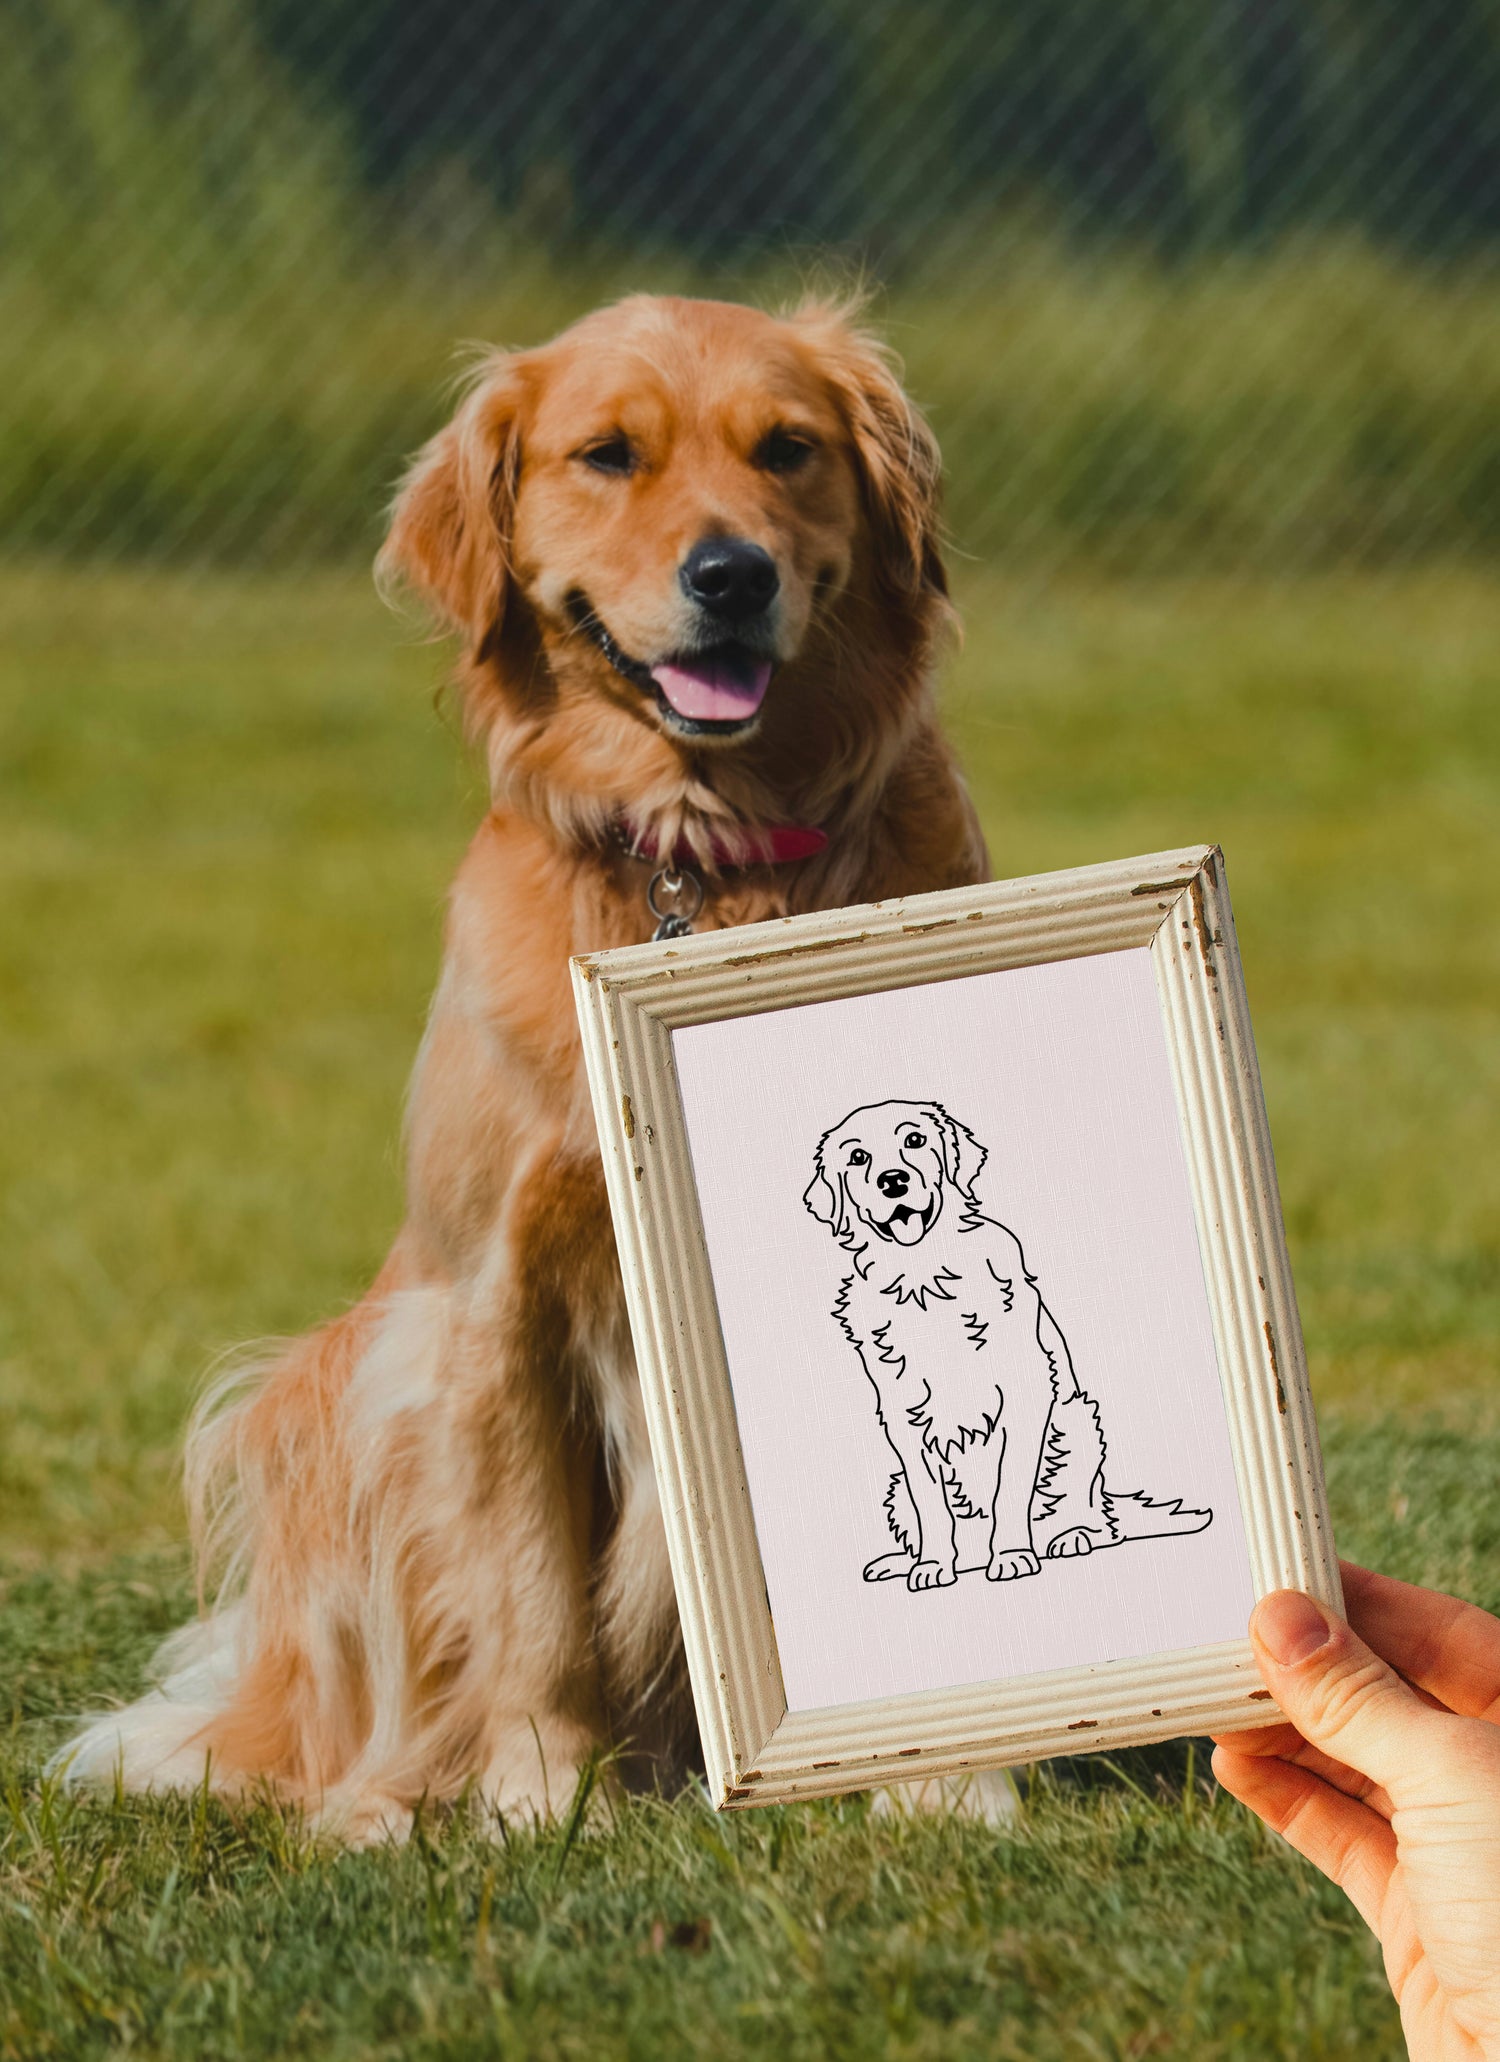 A golden retriever sitting with a framed drawing held up in front